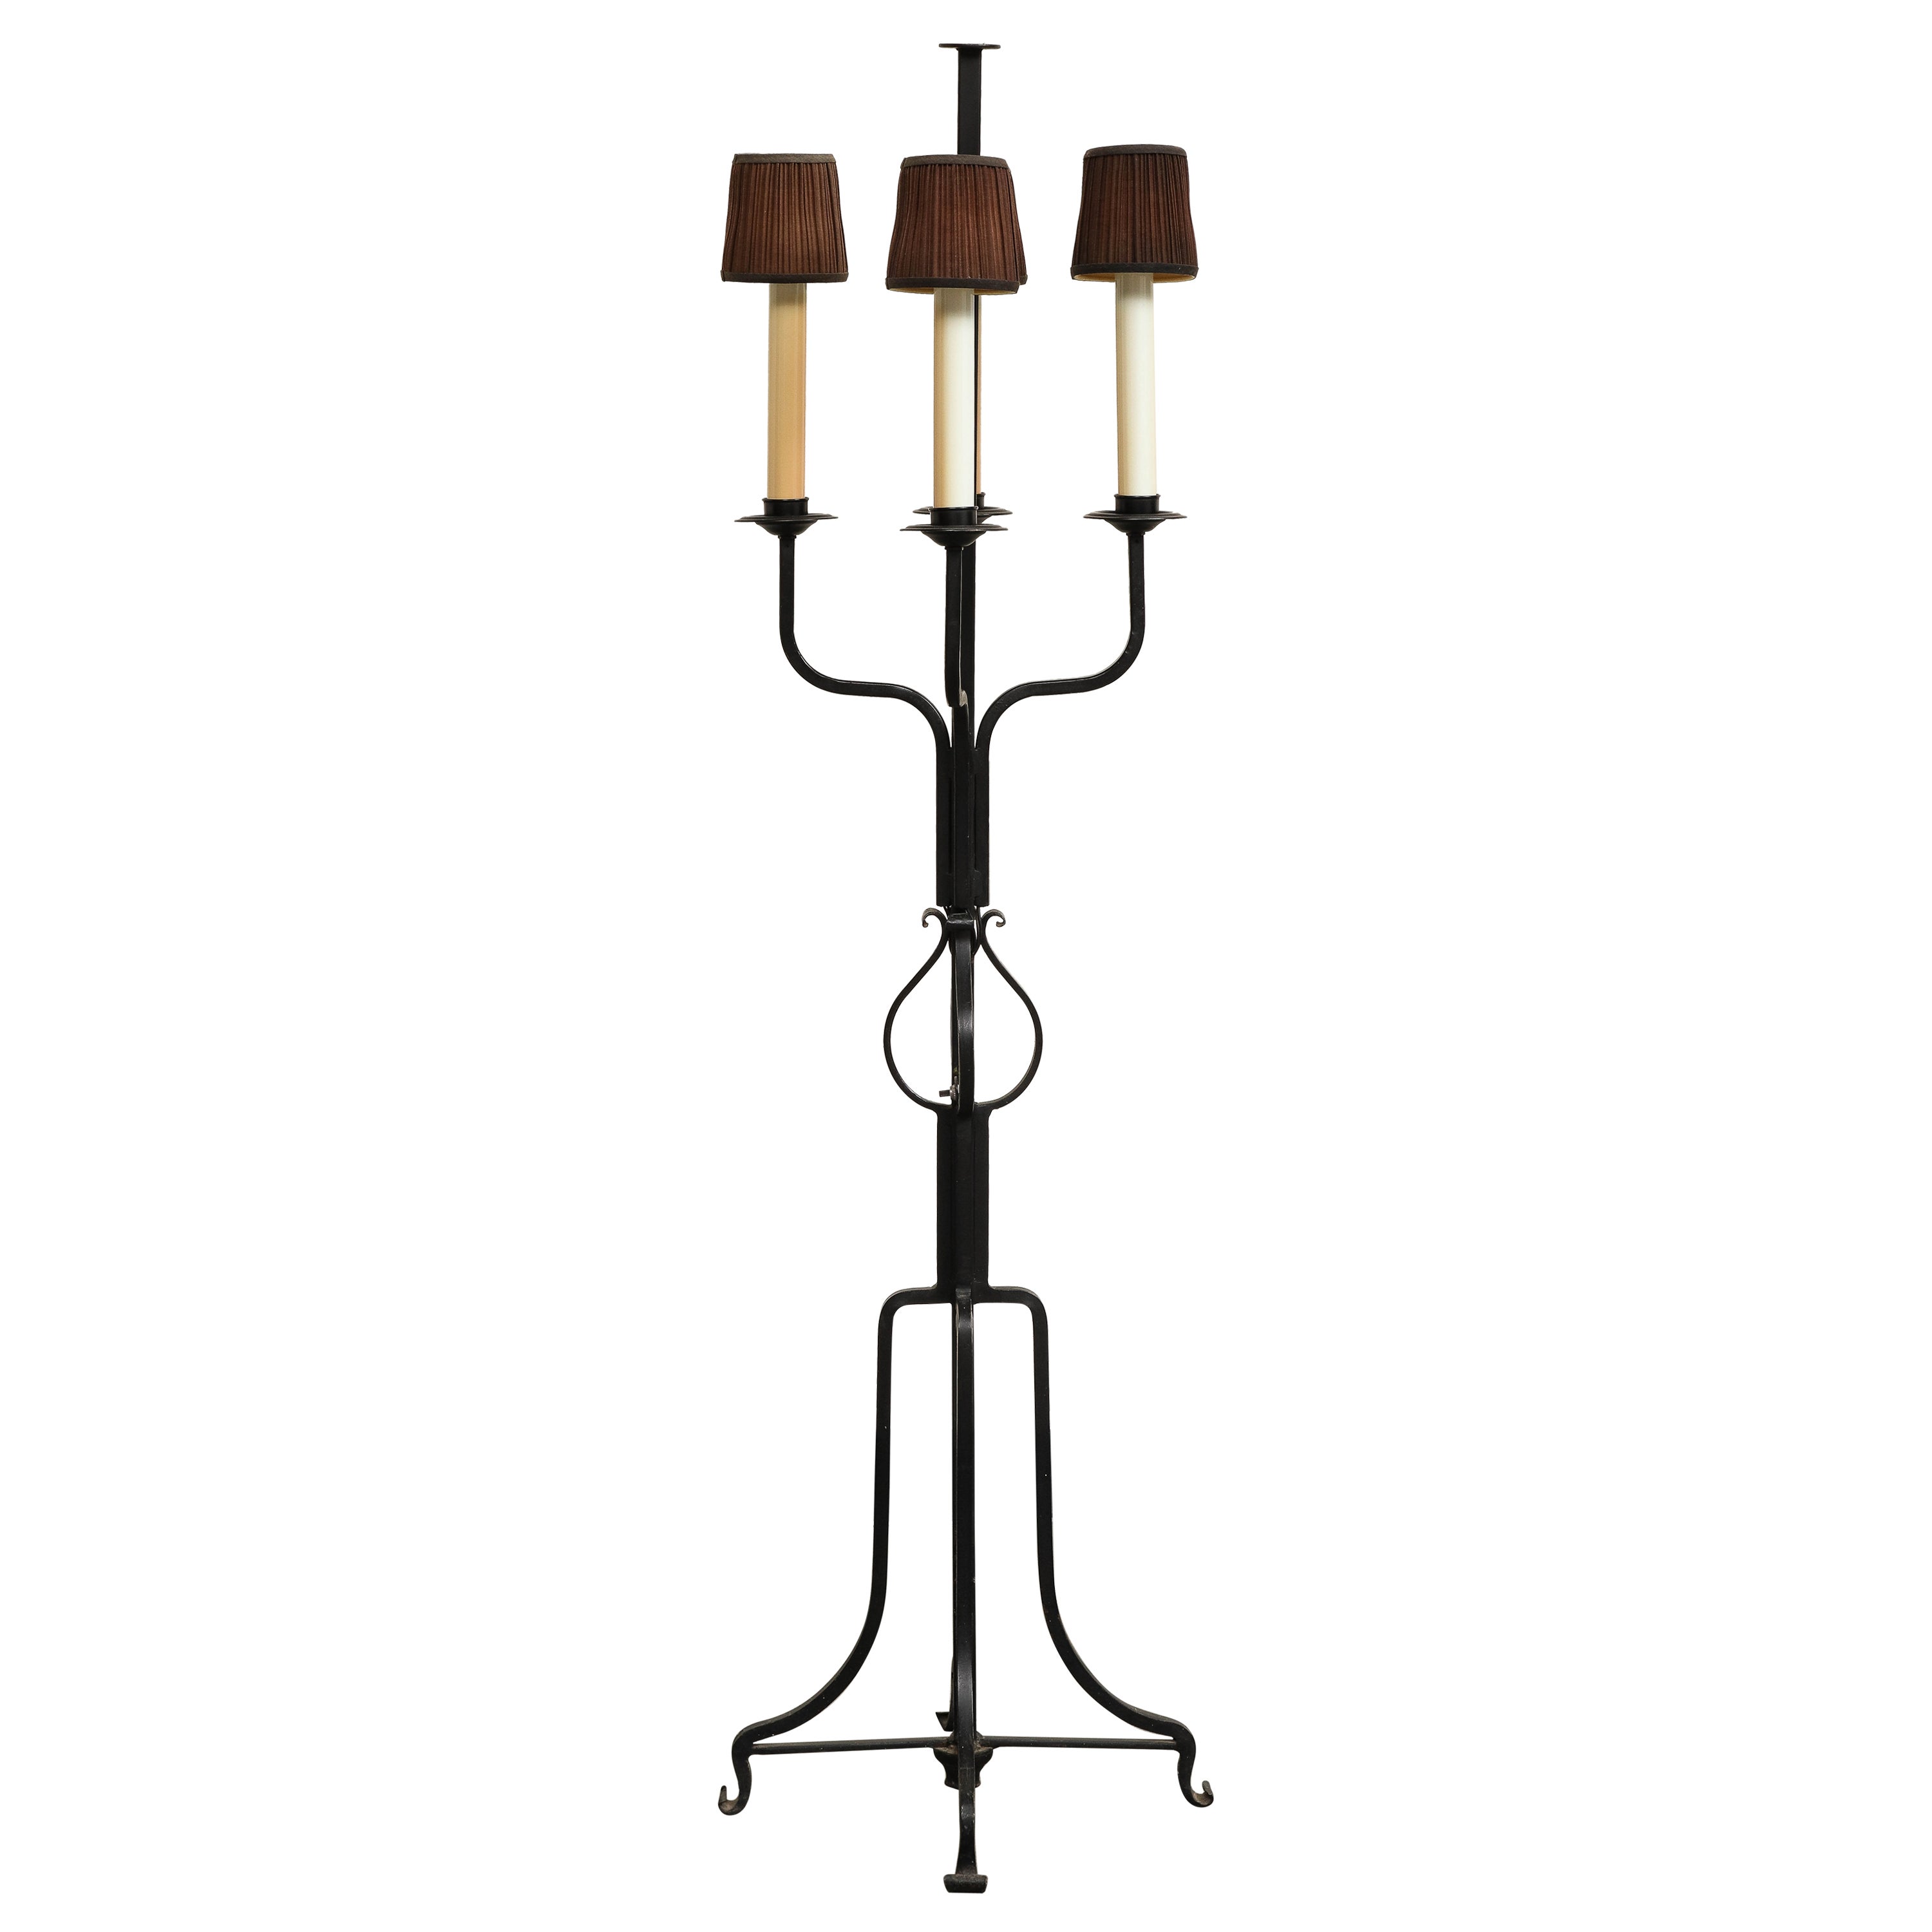 Midcentury Iron Candlestick Floor Lamp, attributed to Tommi Parzinger For Sale